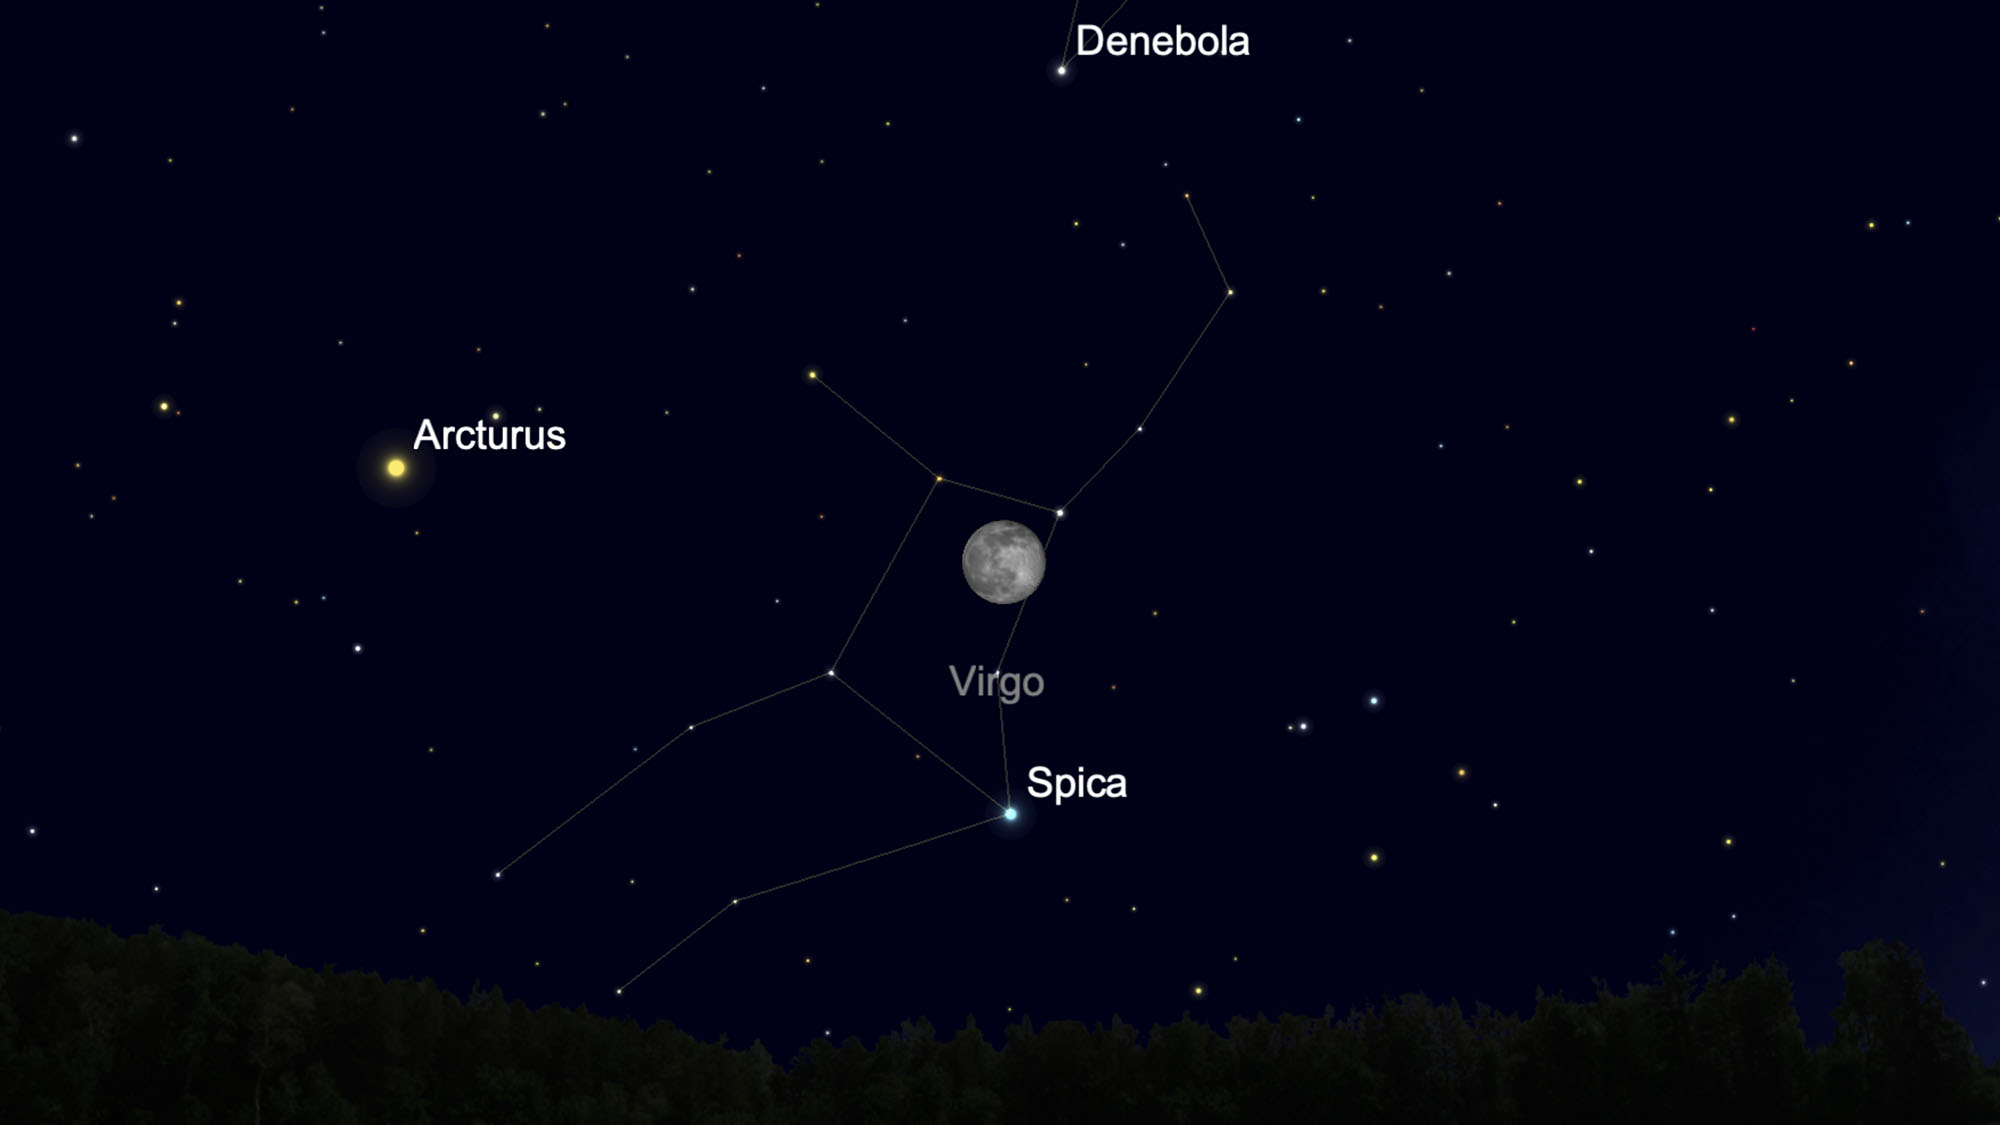 The Full Worm Moon will be in the constellation Virgo.